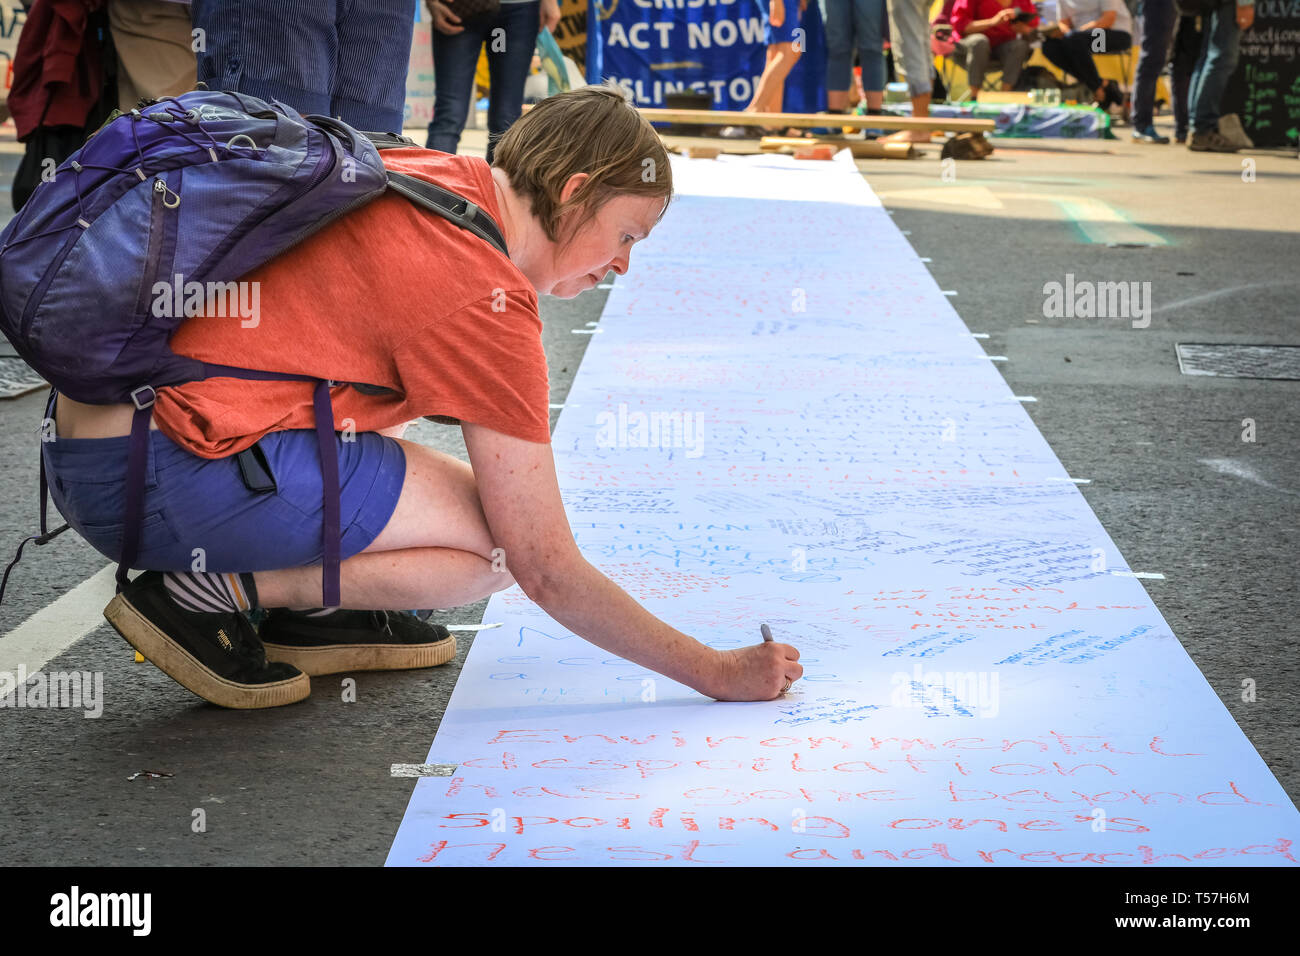 Marble Arch, London, UK. 22nd Apr, 2019. People write down messages about climate change. Activists once again protest largely peacefully in bright sunshine at Marble Arch. Campaigners were back at Marble Arch - the only Met-sanctioned protest space - on Monday, as activists met to plan the week ahead. The Marbe Arch site includes a large tented area for protesters to sleep and rest. Credit: Imageplotter/Alamy Live News Stock Photo